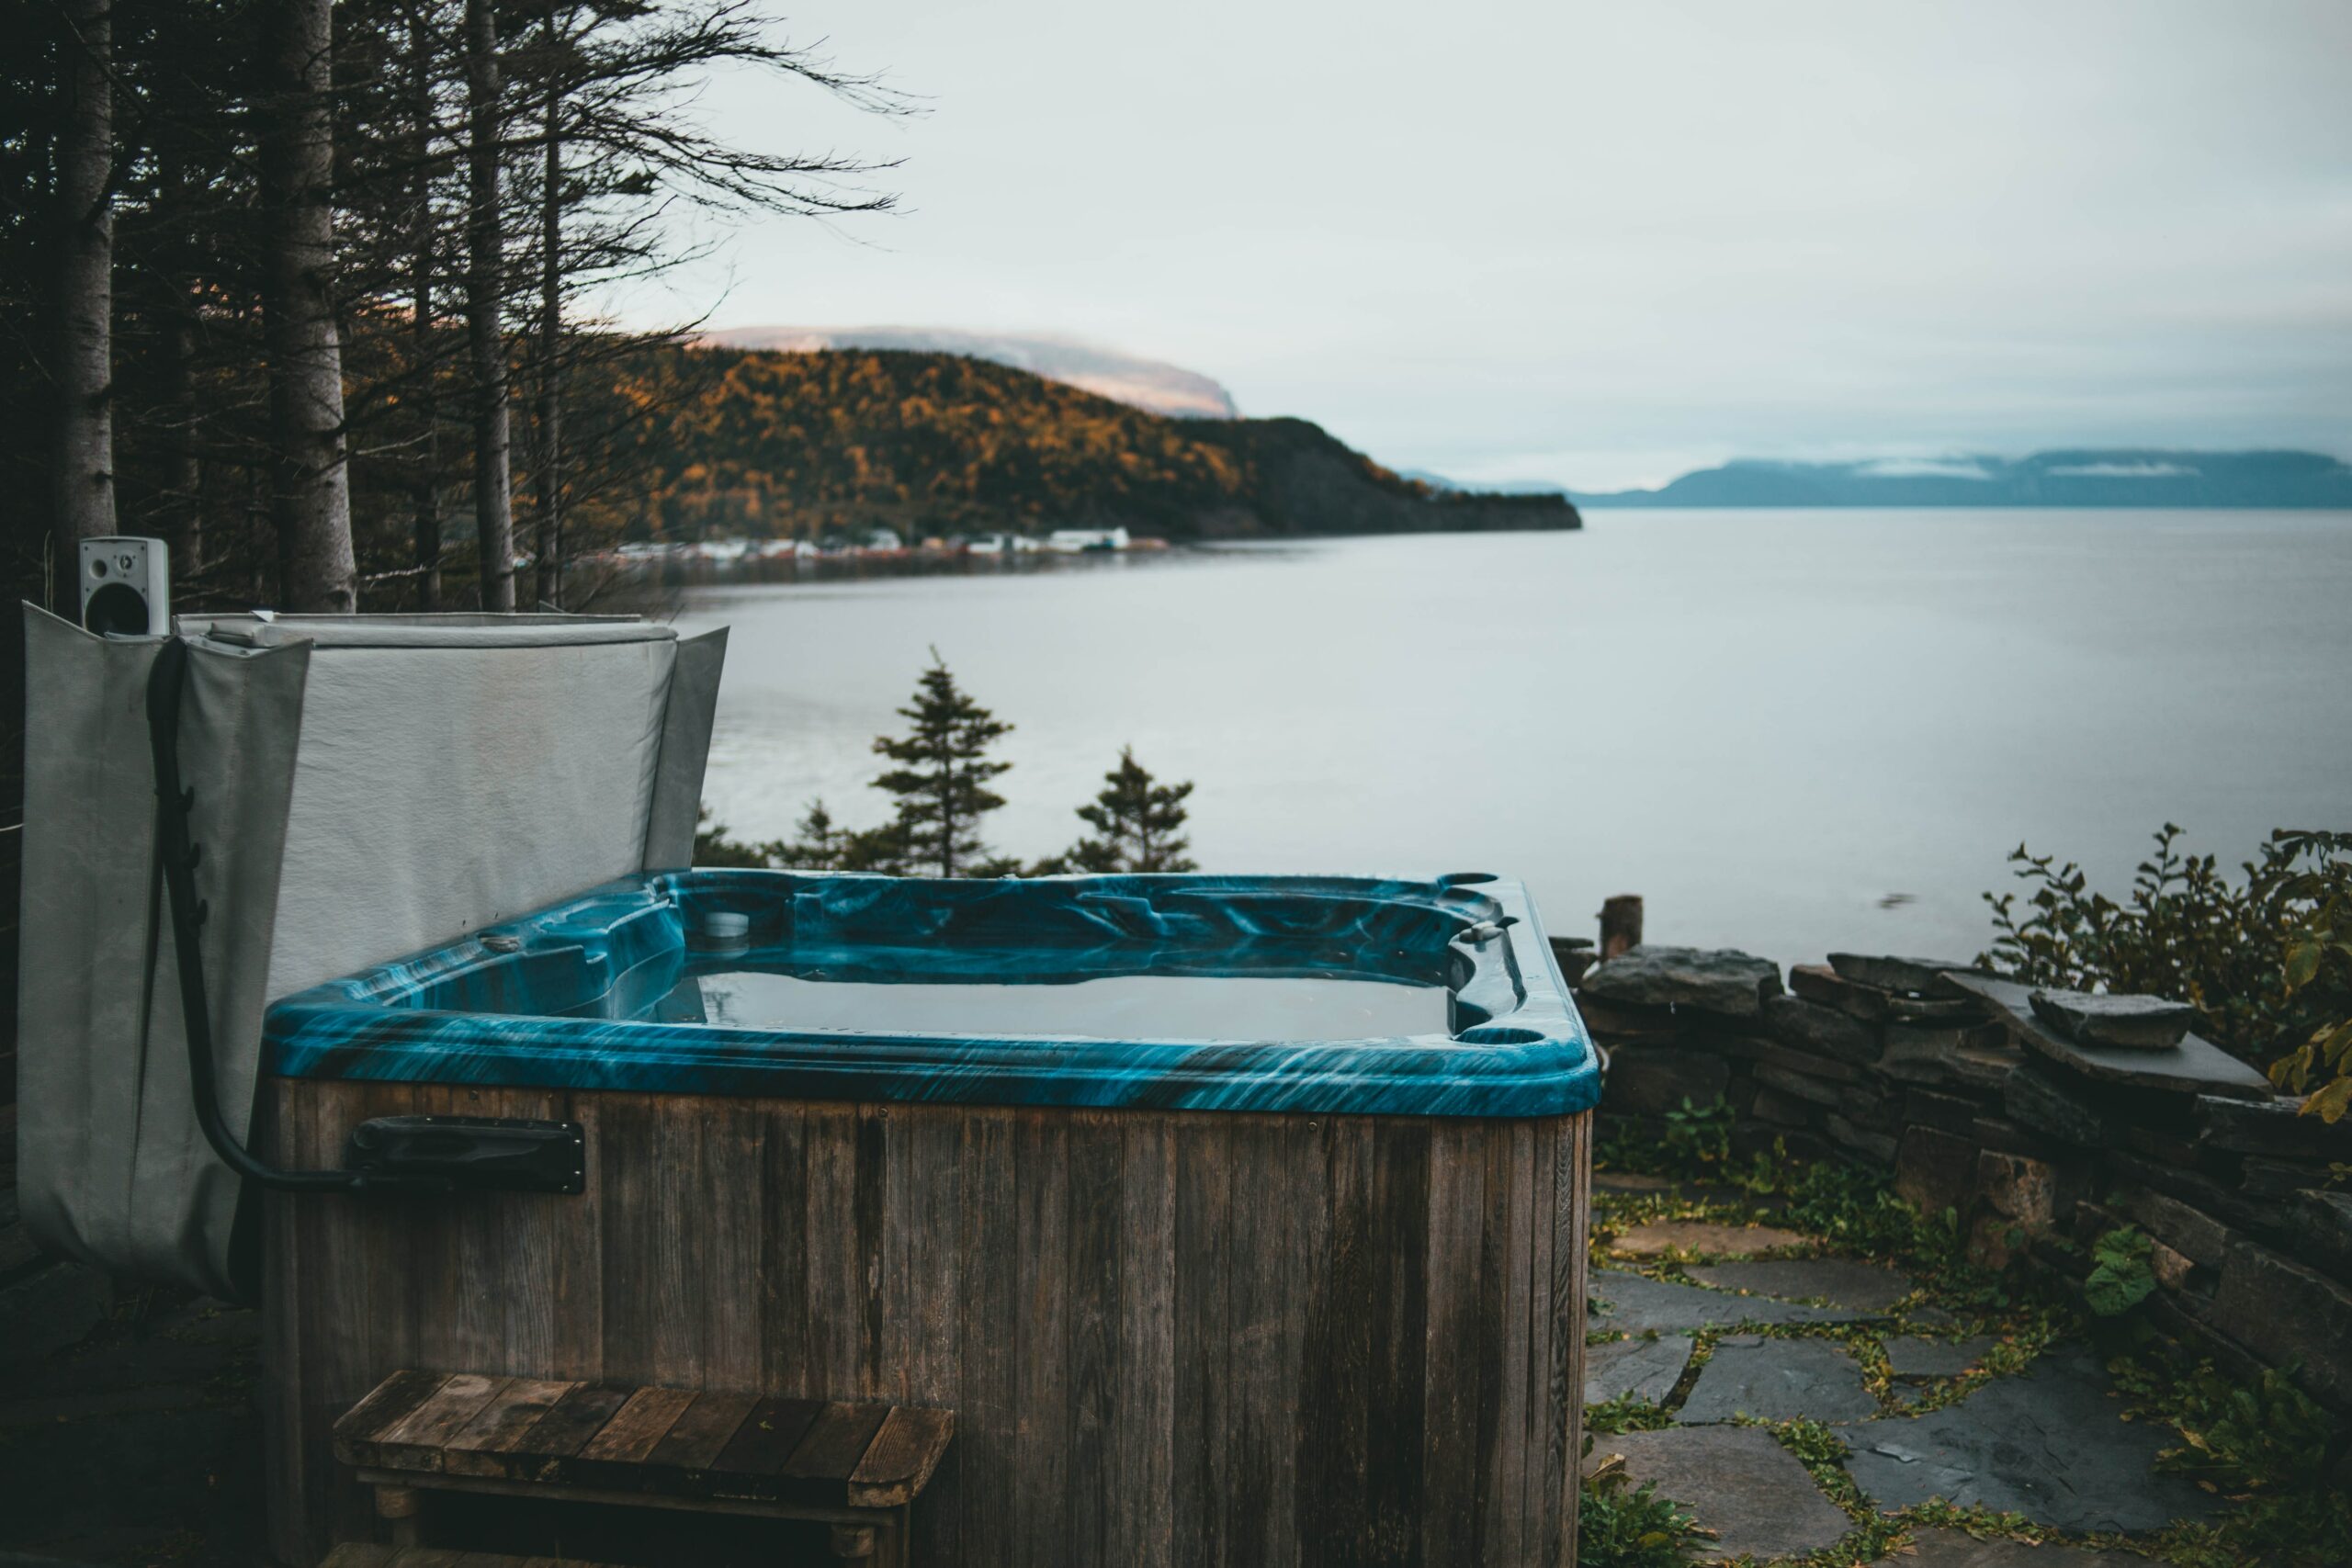 Things to Consider Before Installing a Hot Tub